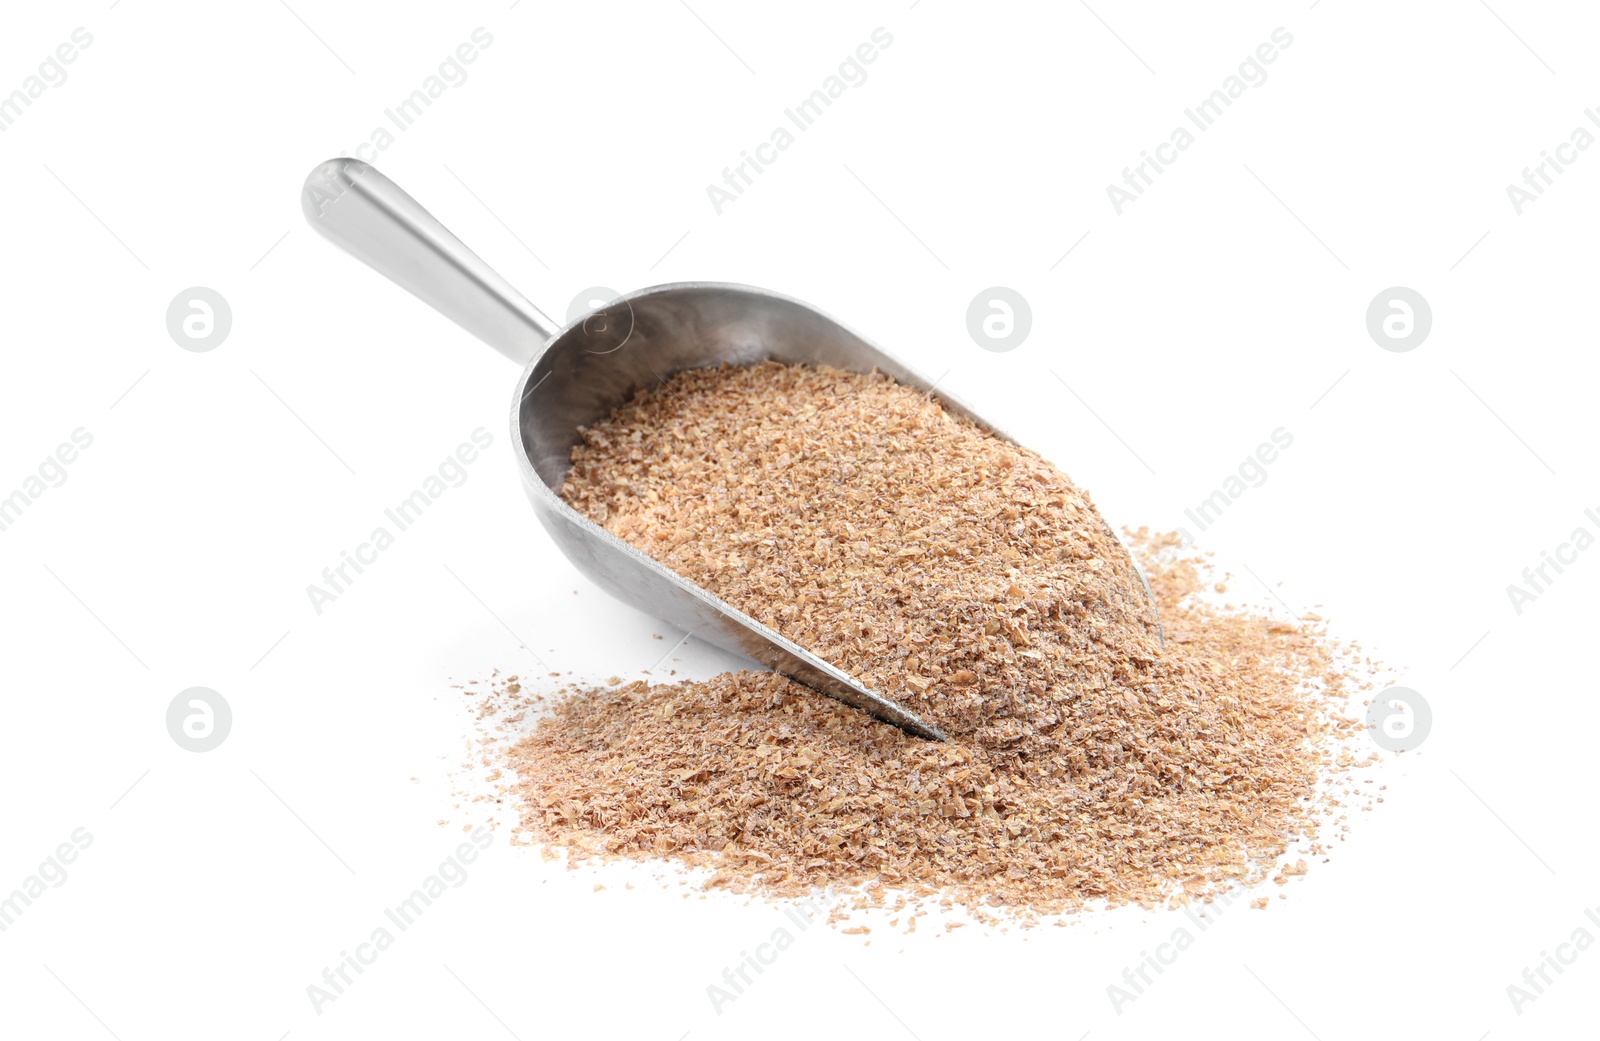 Photo of Metal scoop with wheat bran on white background